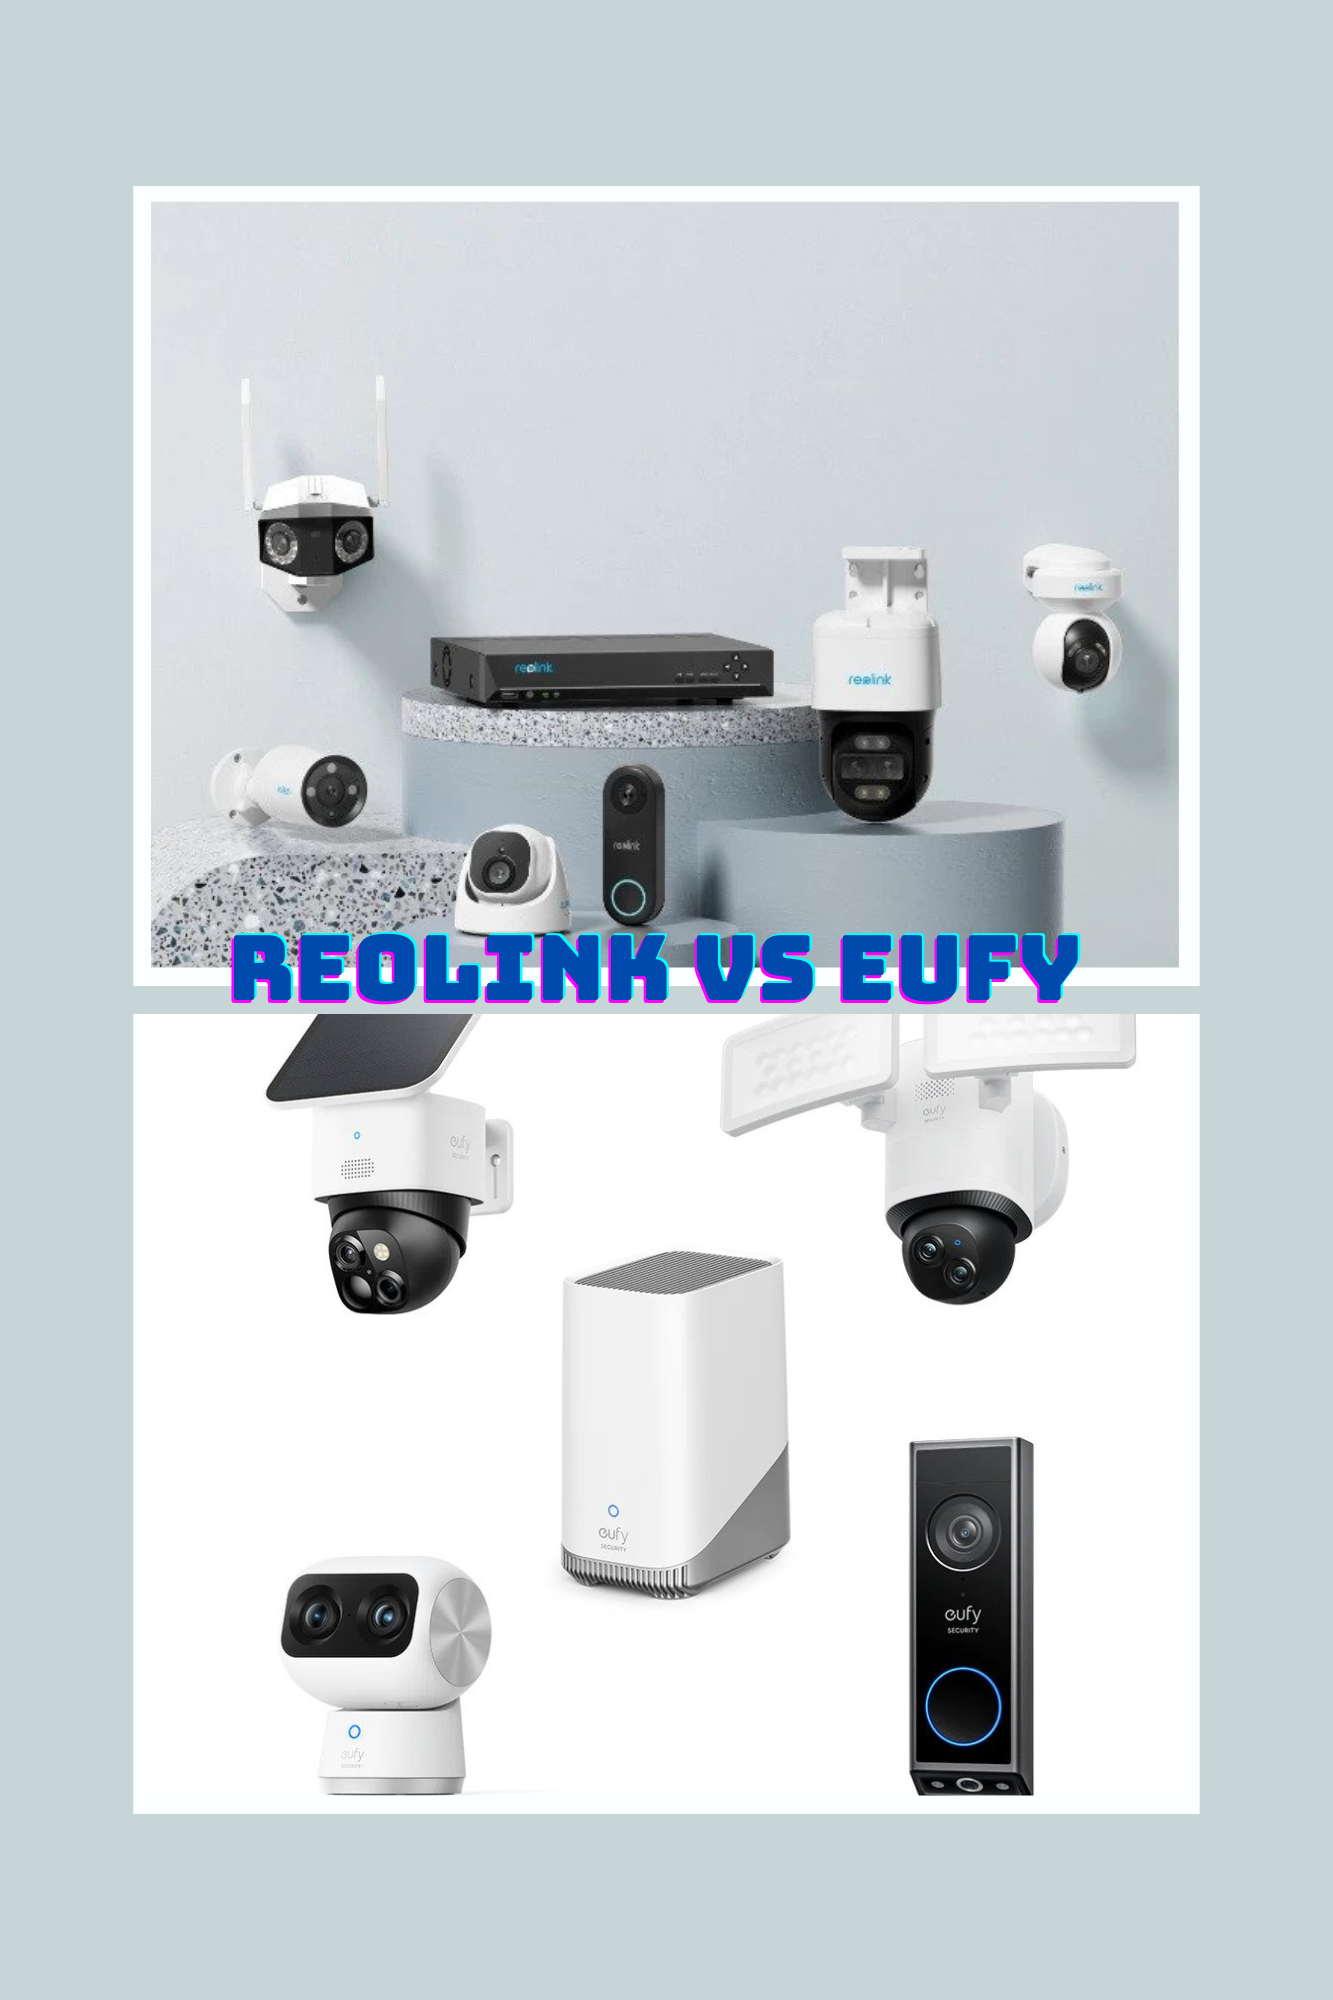 Reolink vs Eufy security system